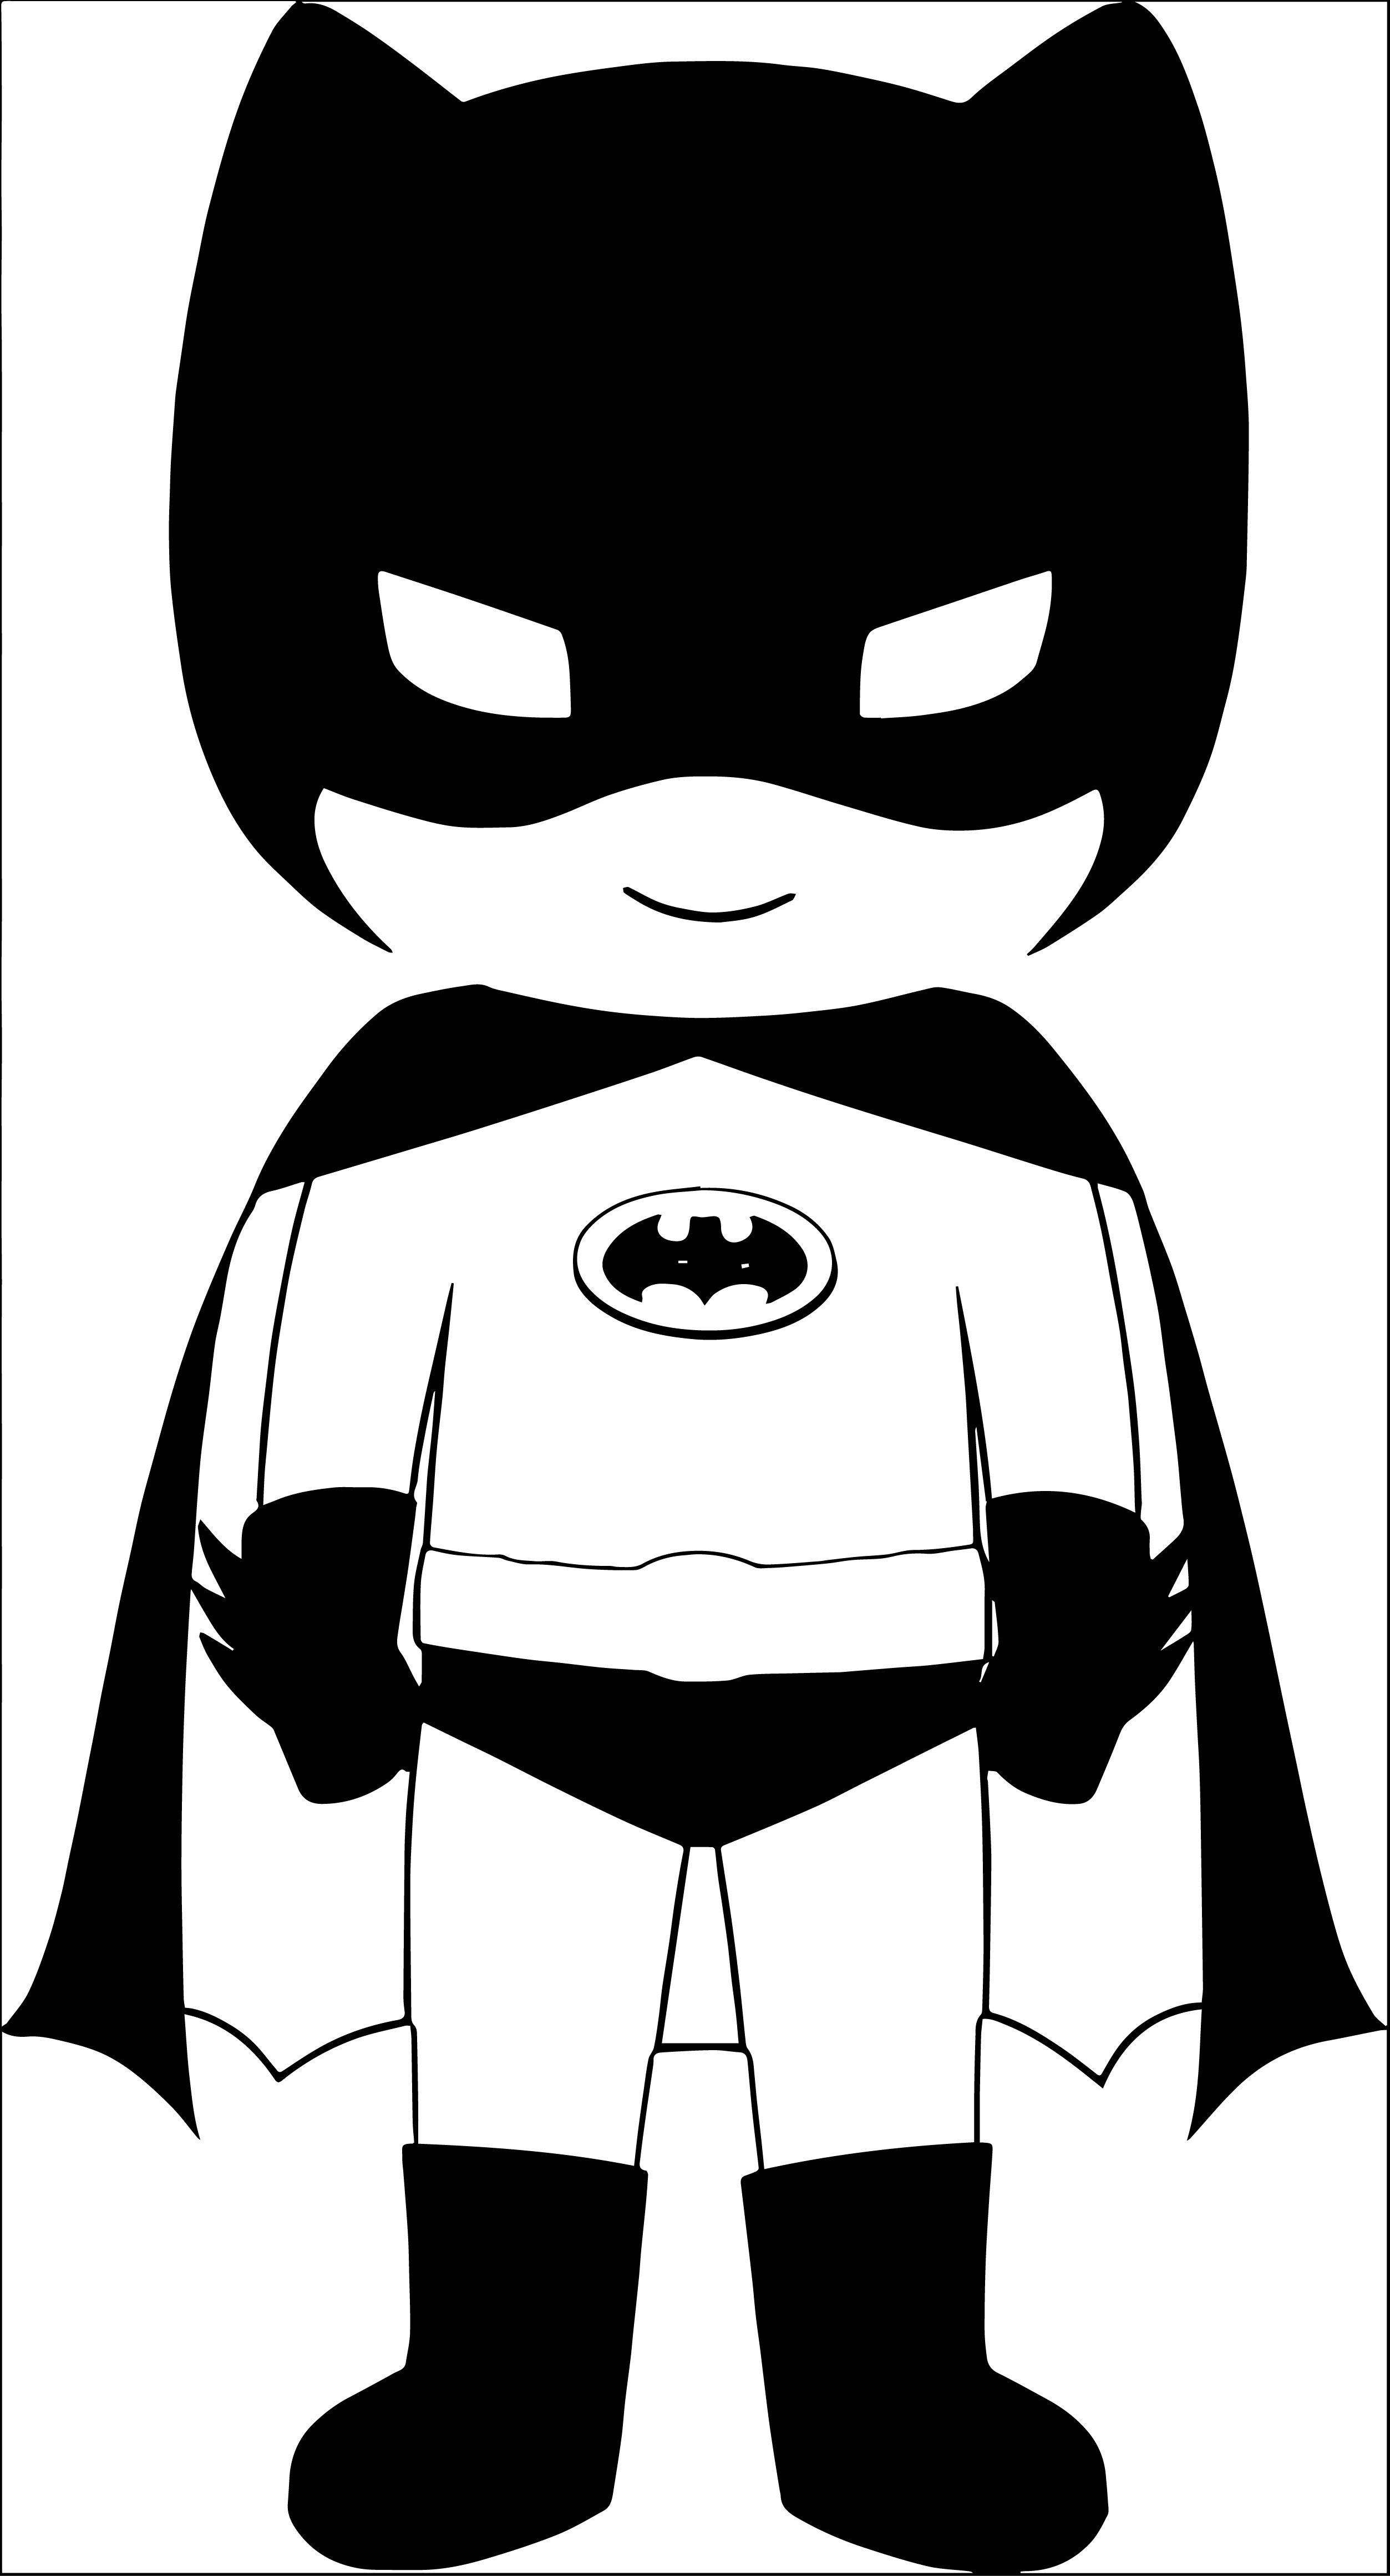 Image result for black and white superhero clipart